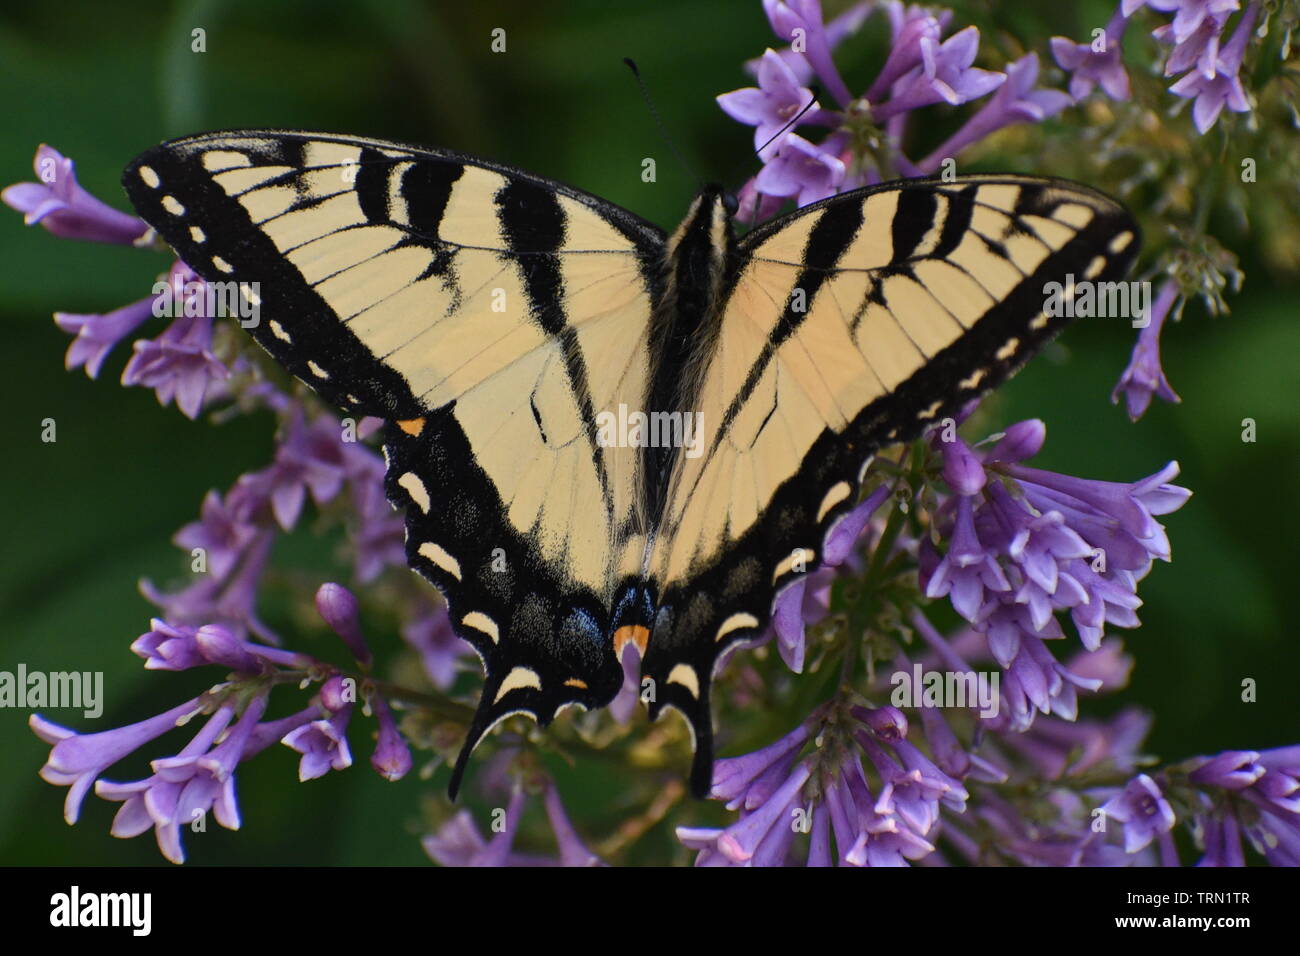 Springtime garden butterfly feeding amidst pollination of violet floral display Stock Photo